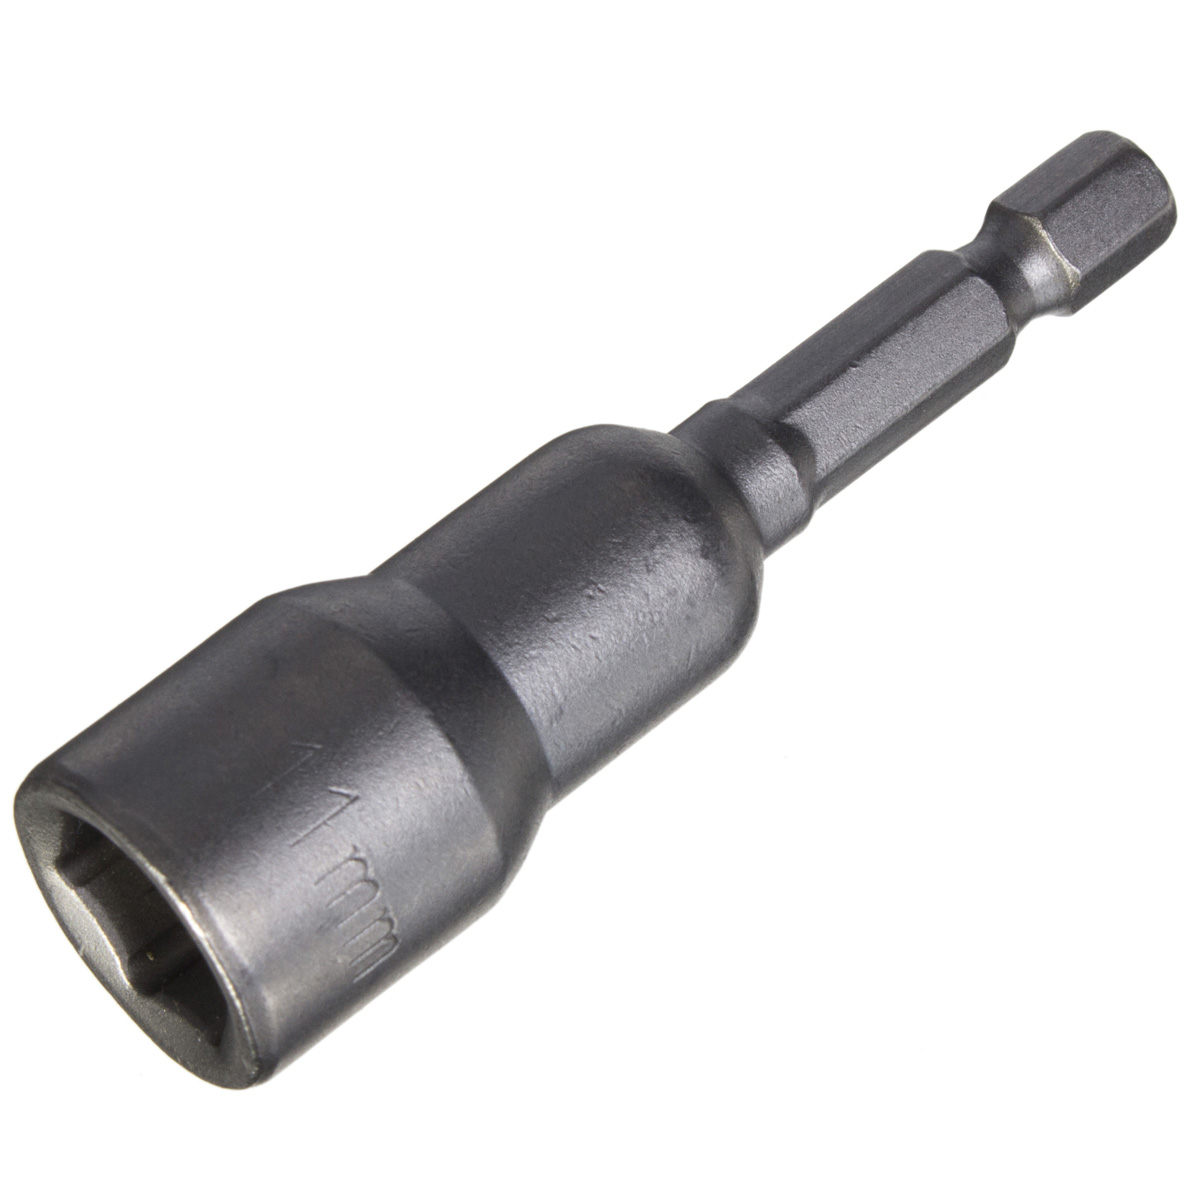 65mm-14-Inch-Hex-Socket-Magnetic-Nut-Driver-Setter-6mm-19mm-Drill-Bit-Adapter-996527-2